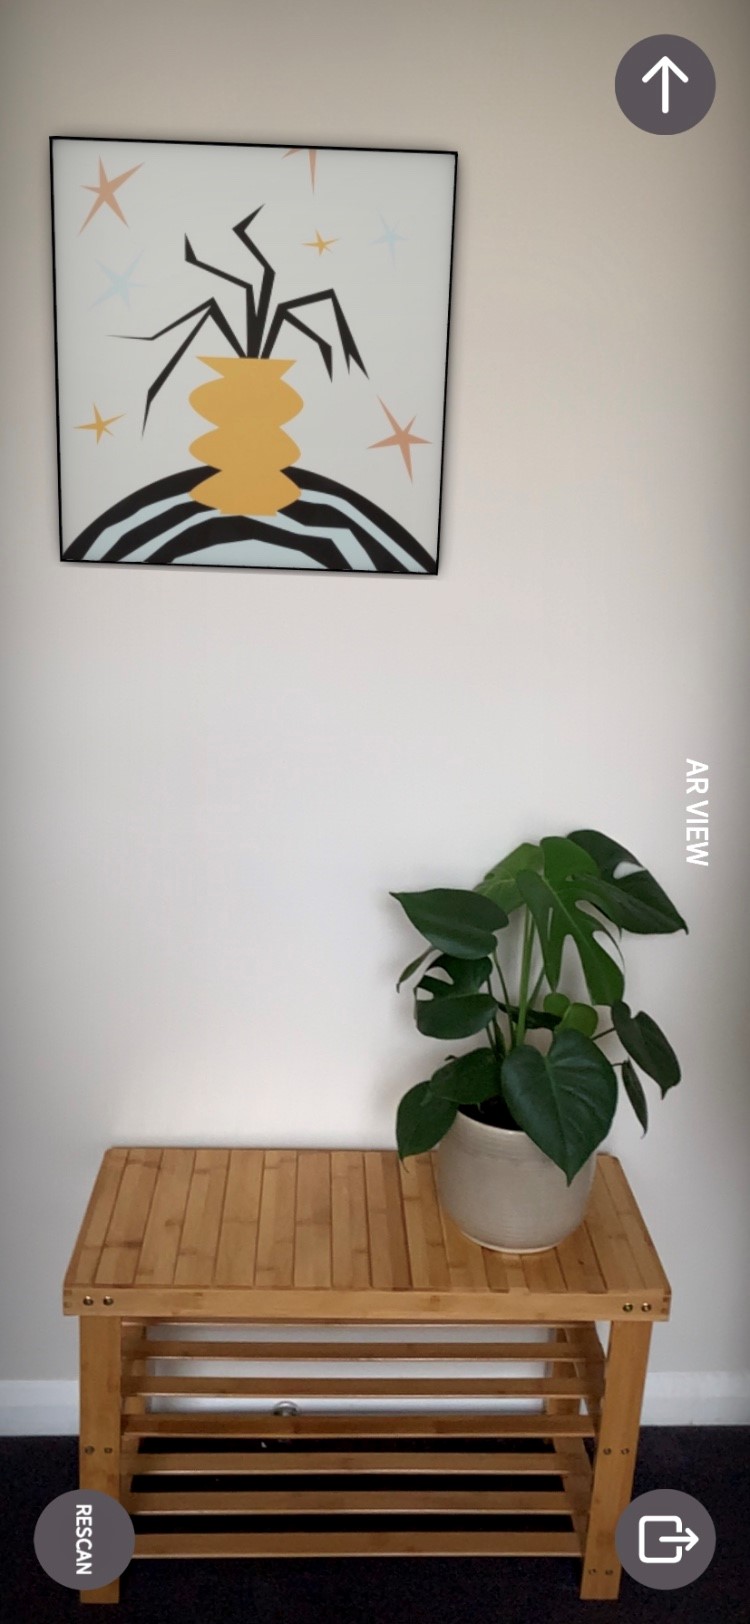 app to visualize pictures on wall